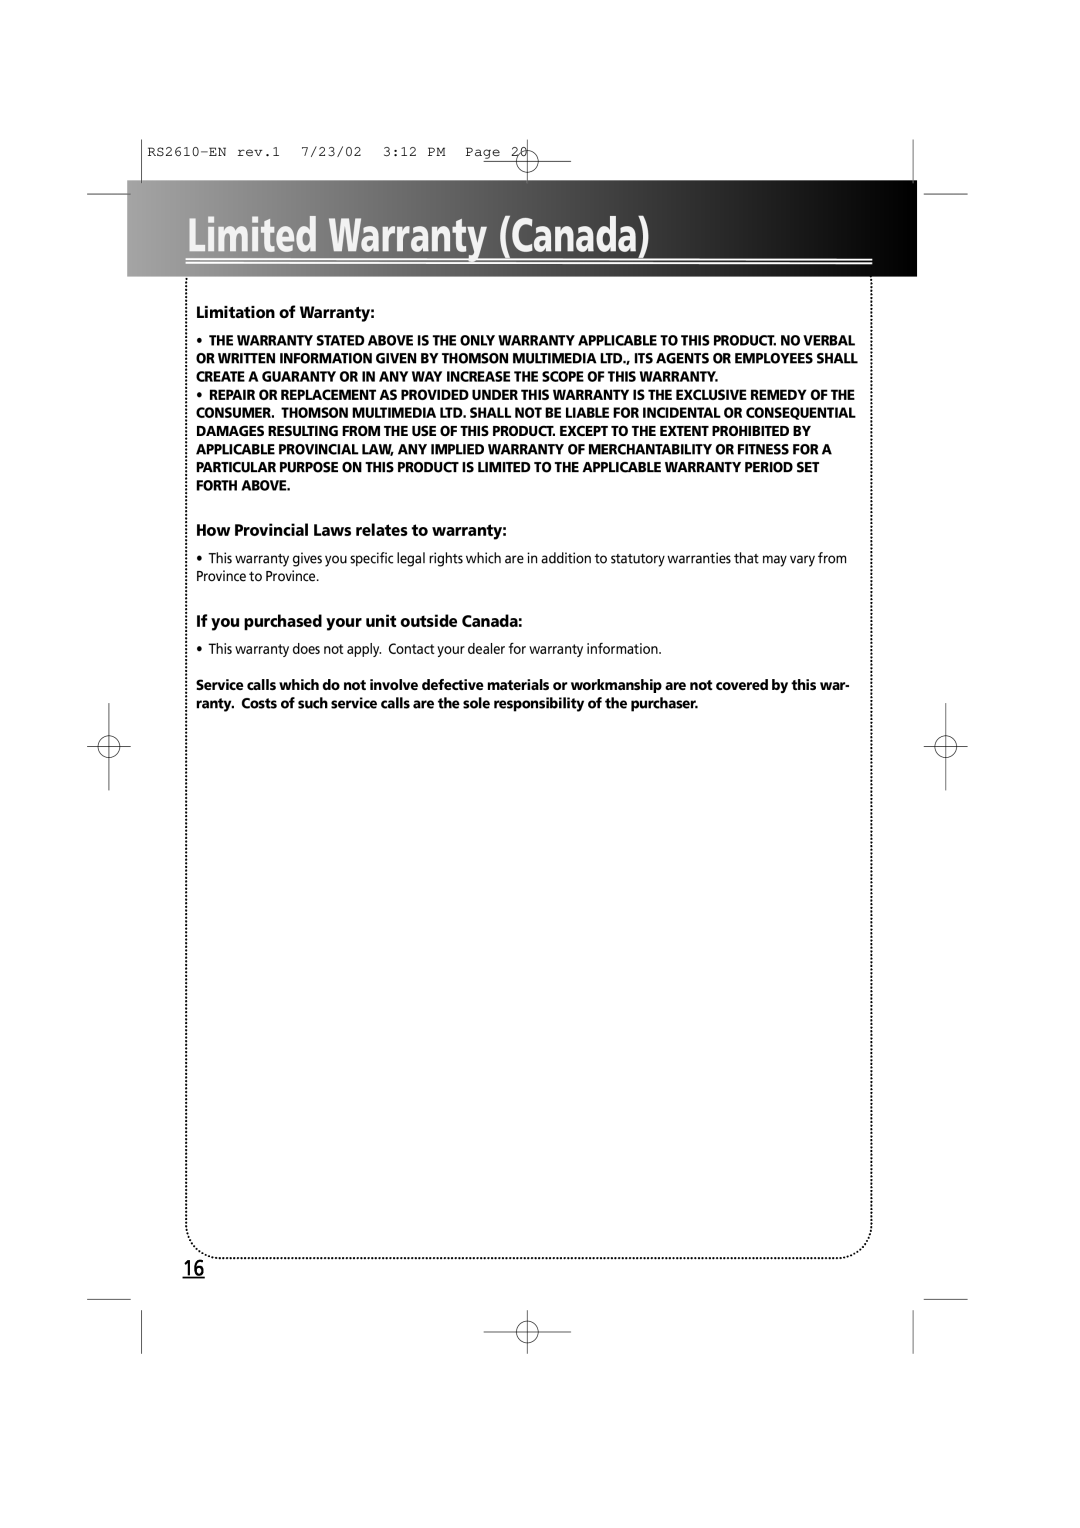 RCA RS2610 manual Limited Warranty Canada, Limitation of Warranty, How Provincial Laws relates to warranty 